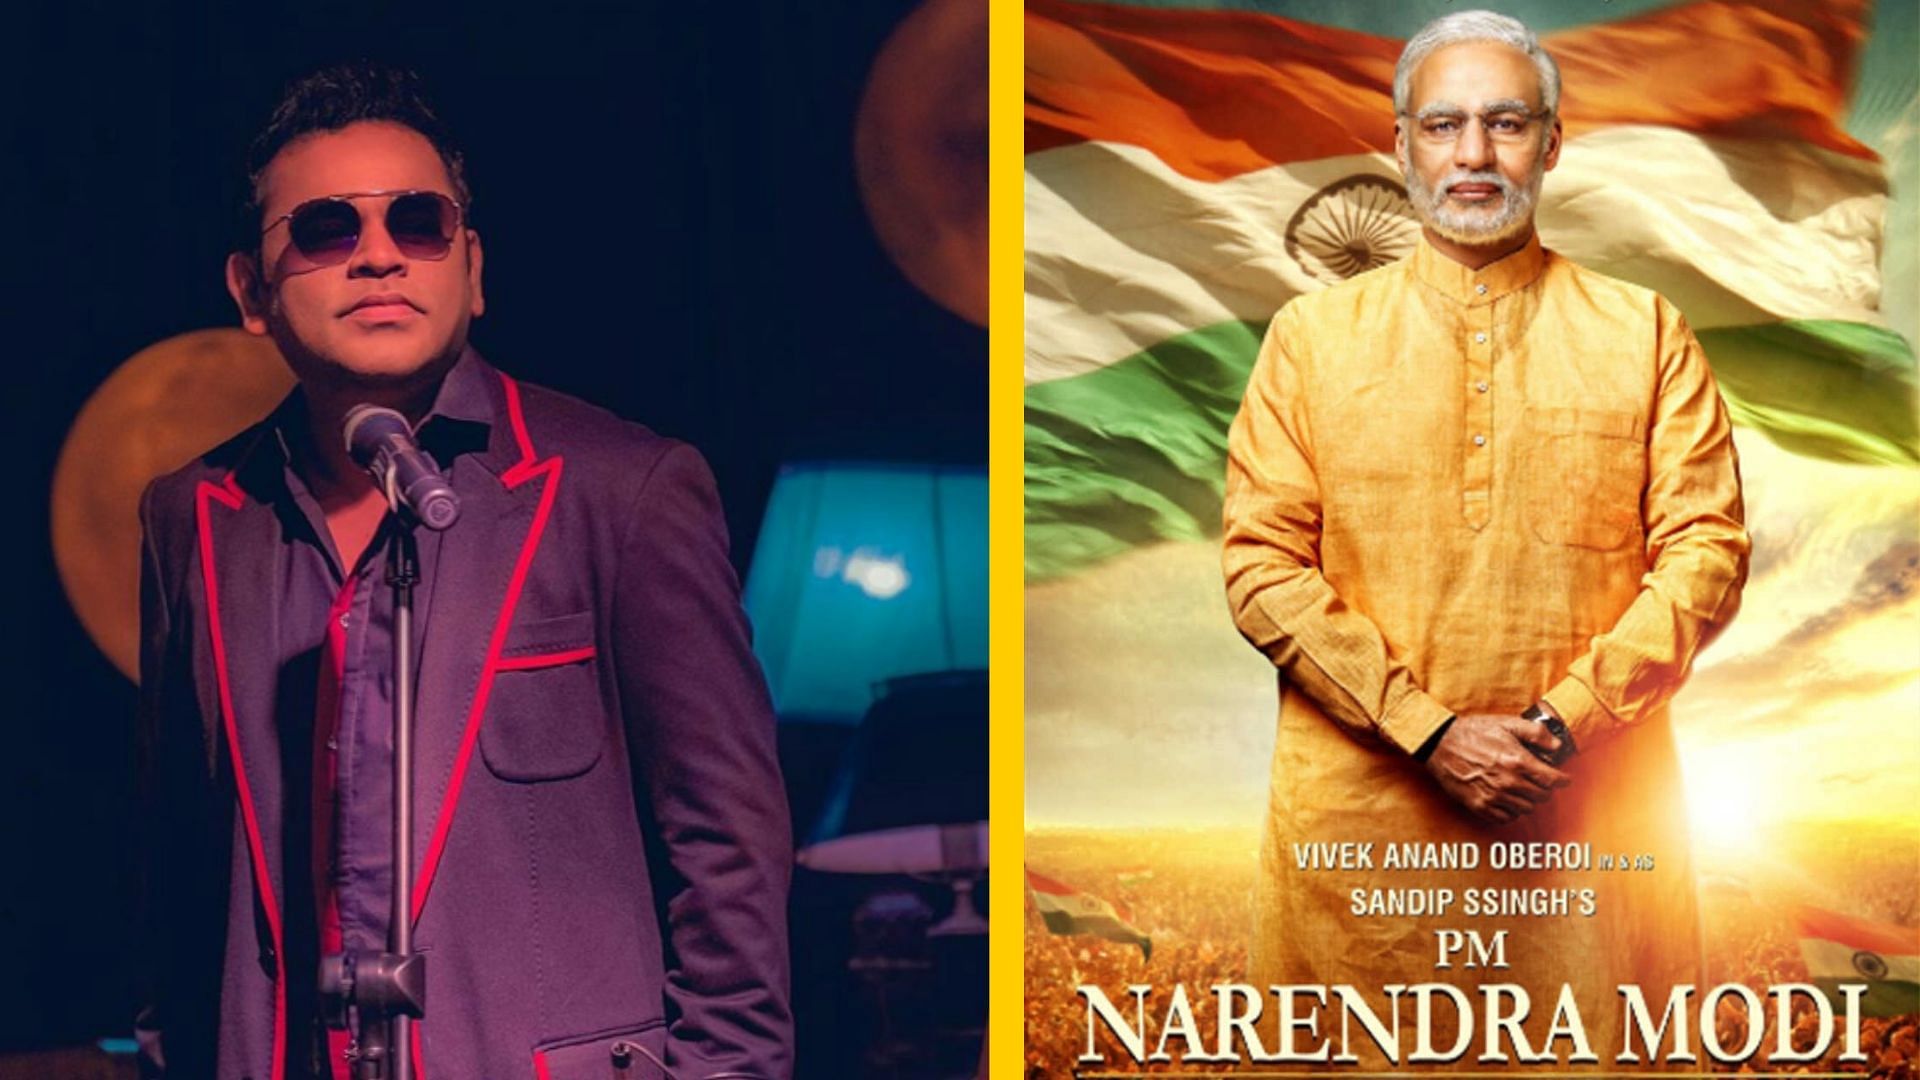 PM Narendra Modi makers refuse to comment on AR Rahman being upset on his song remix.